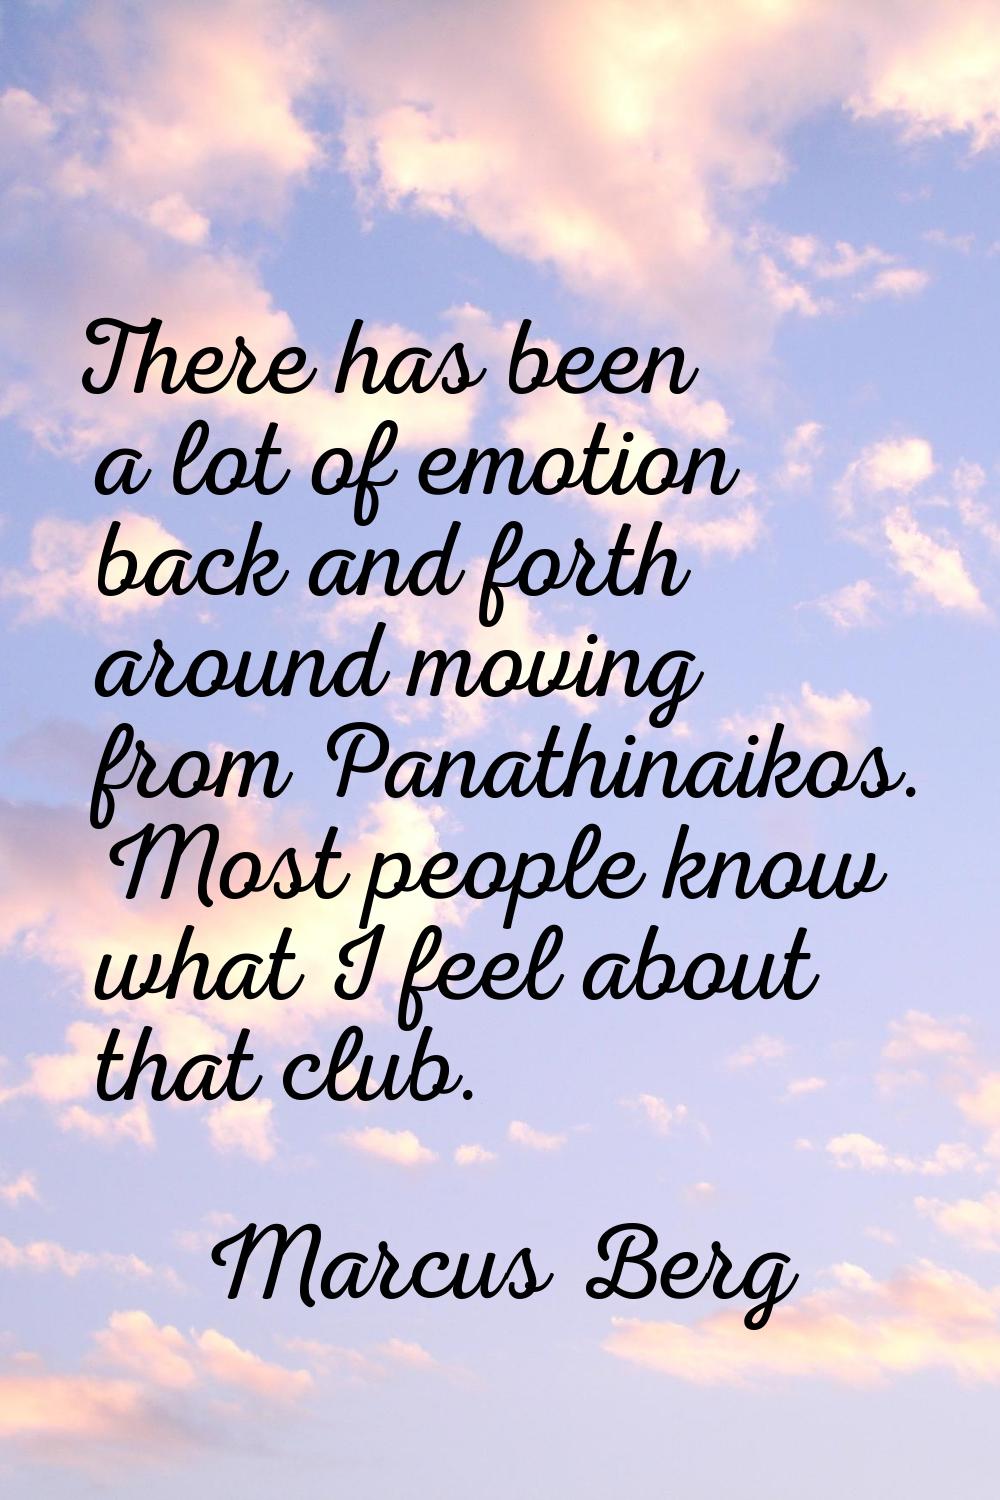 There has been a lot of emotion back and forth around moving from Panathinaikos. Most people know w